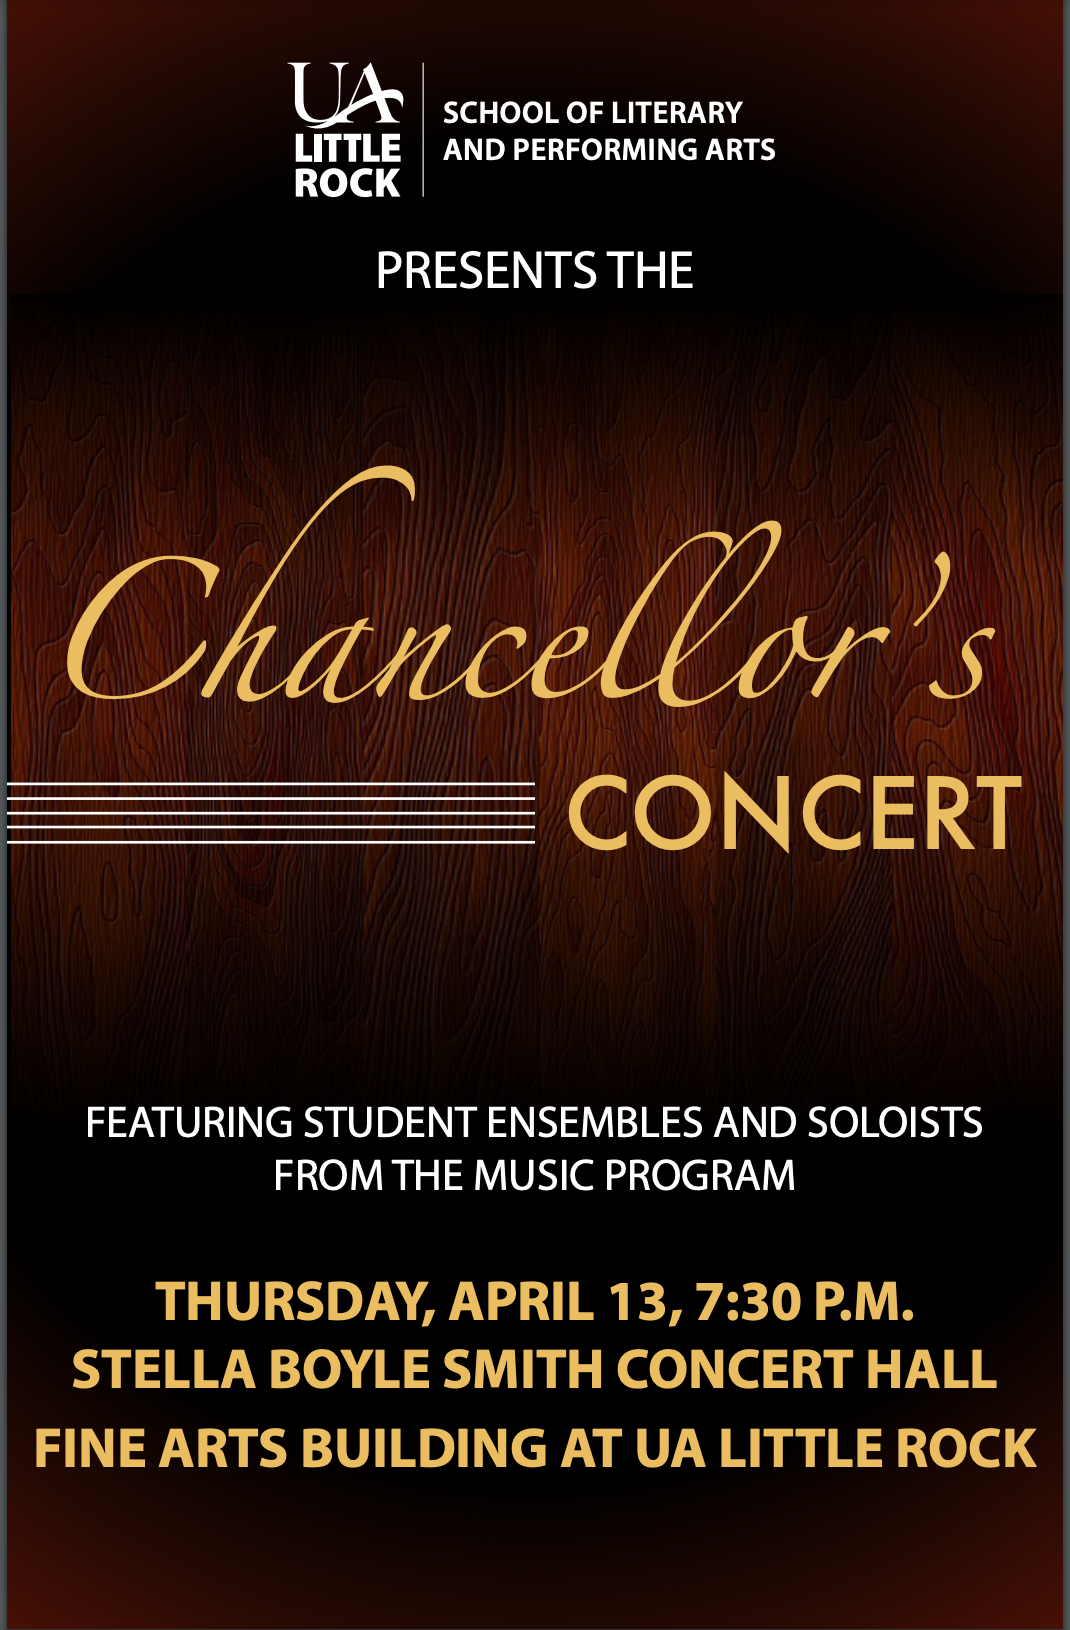 Join us for the Chancellor's Concert on April 13!